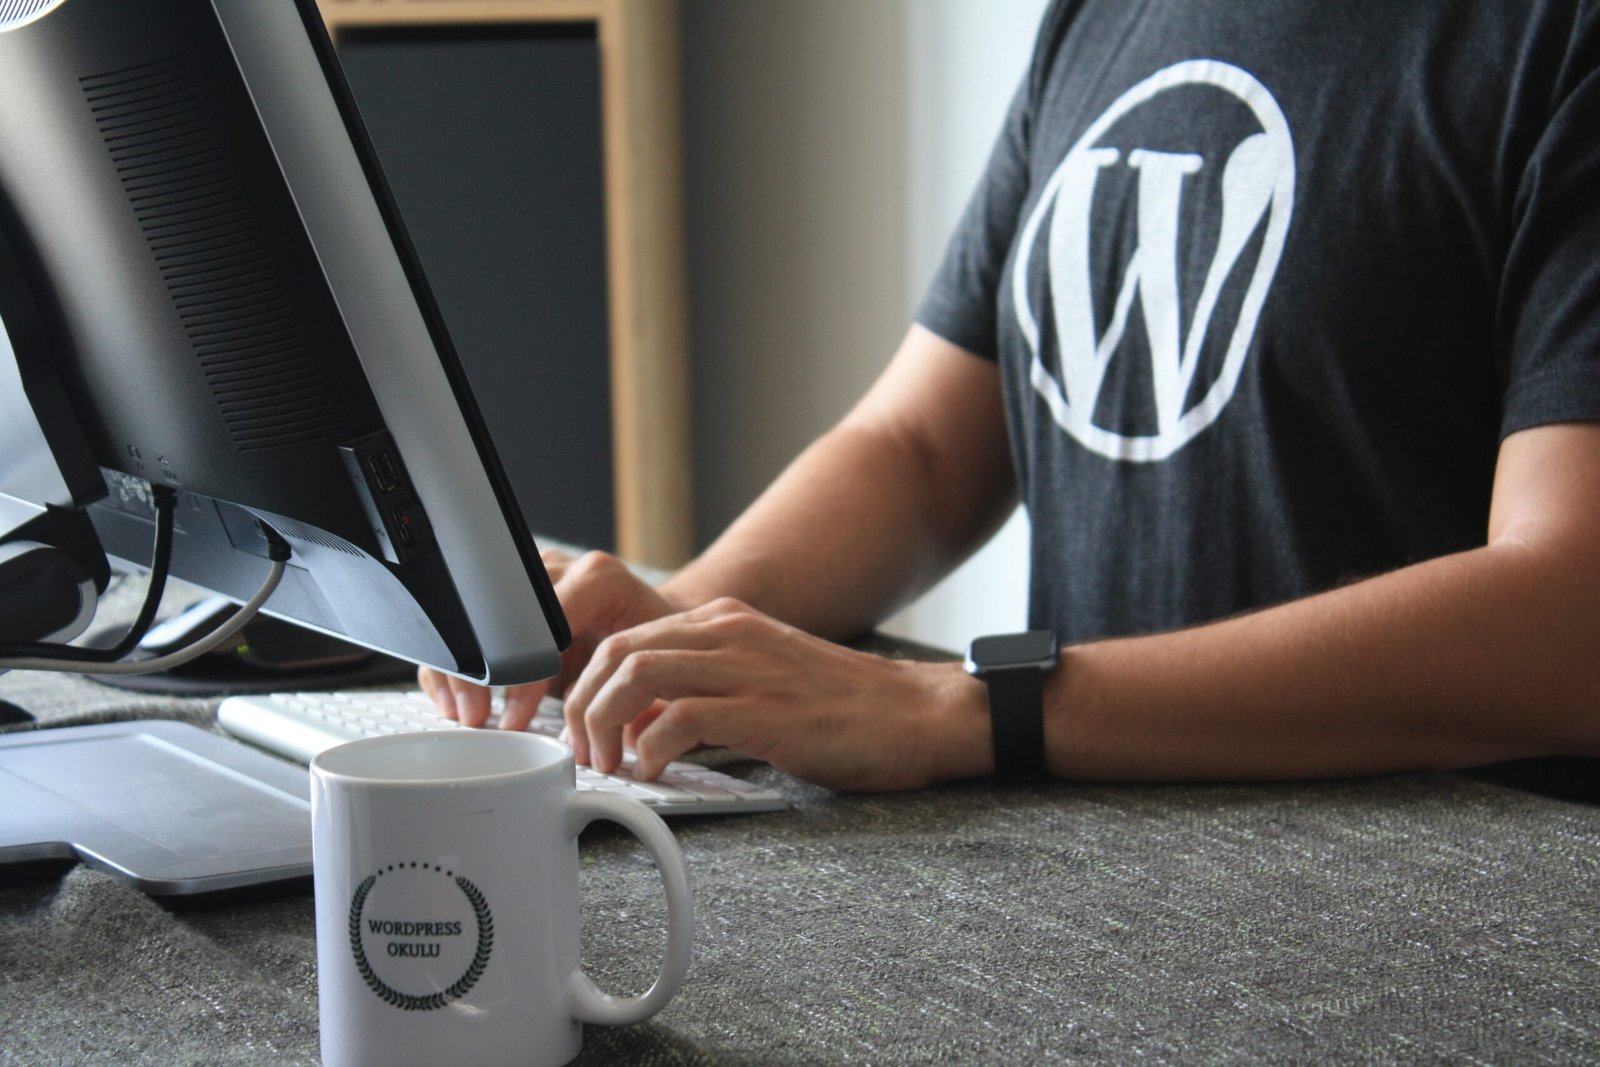 Why WordPress is the best CMS for your small business website